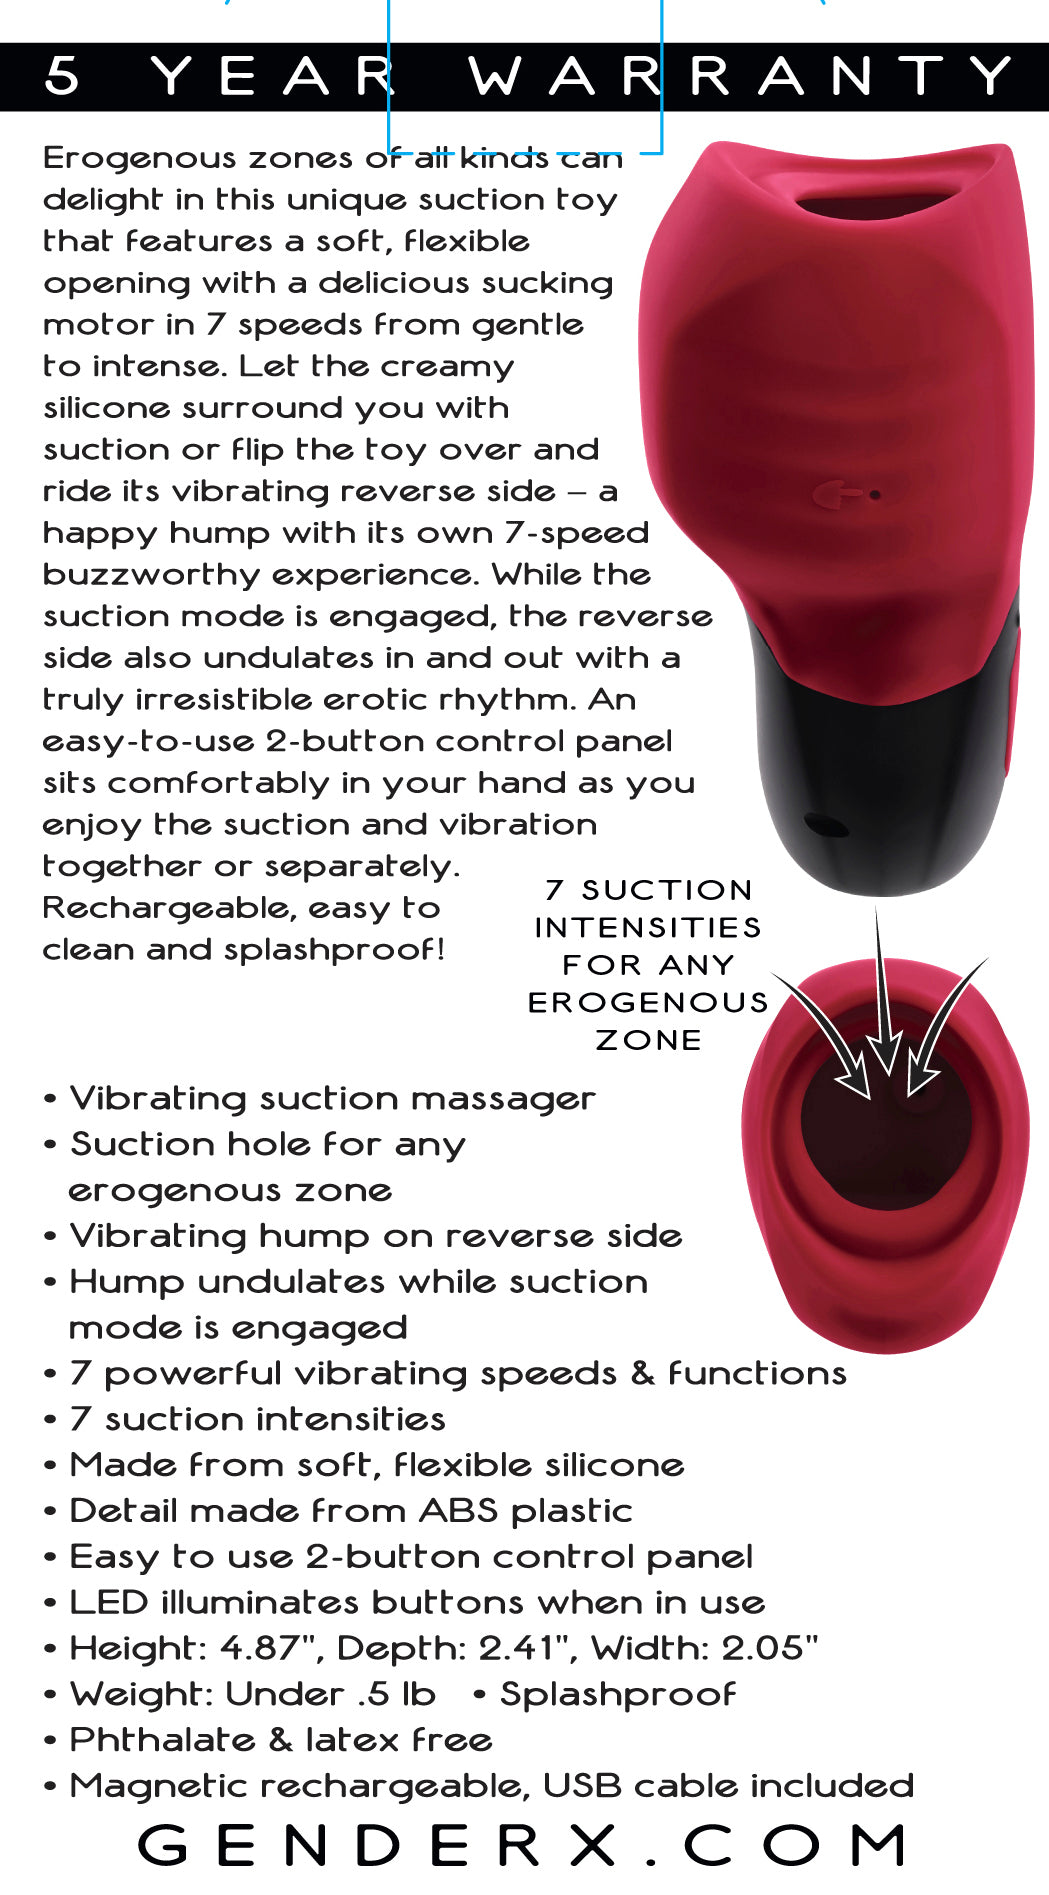 An illustration with description and features of the Body Kisses Vibrating Suction Massager.